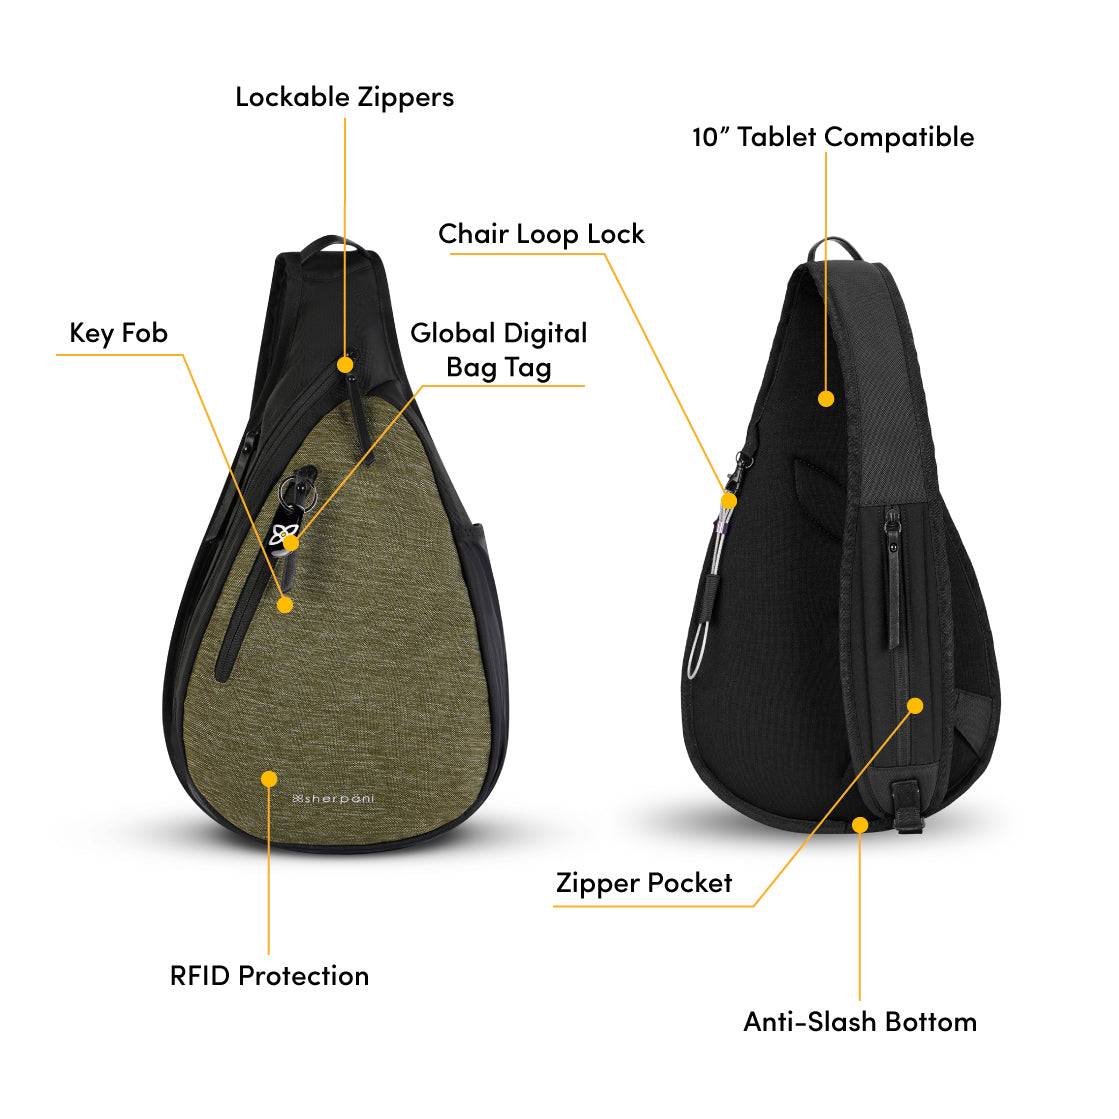 Graphic showcasing the features of Sherpani’s Anti Theft bag, the Esprit AT in Loden. There is a front and a back view of the bag, red circles highlight the following features: Lockable Zippers, Key Fob, Chair Loop Lock, 1” Tablet Compatible, Zipper Pocket, Anti-Slash Bottom, RFID Protection. 